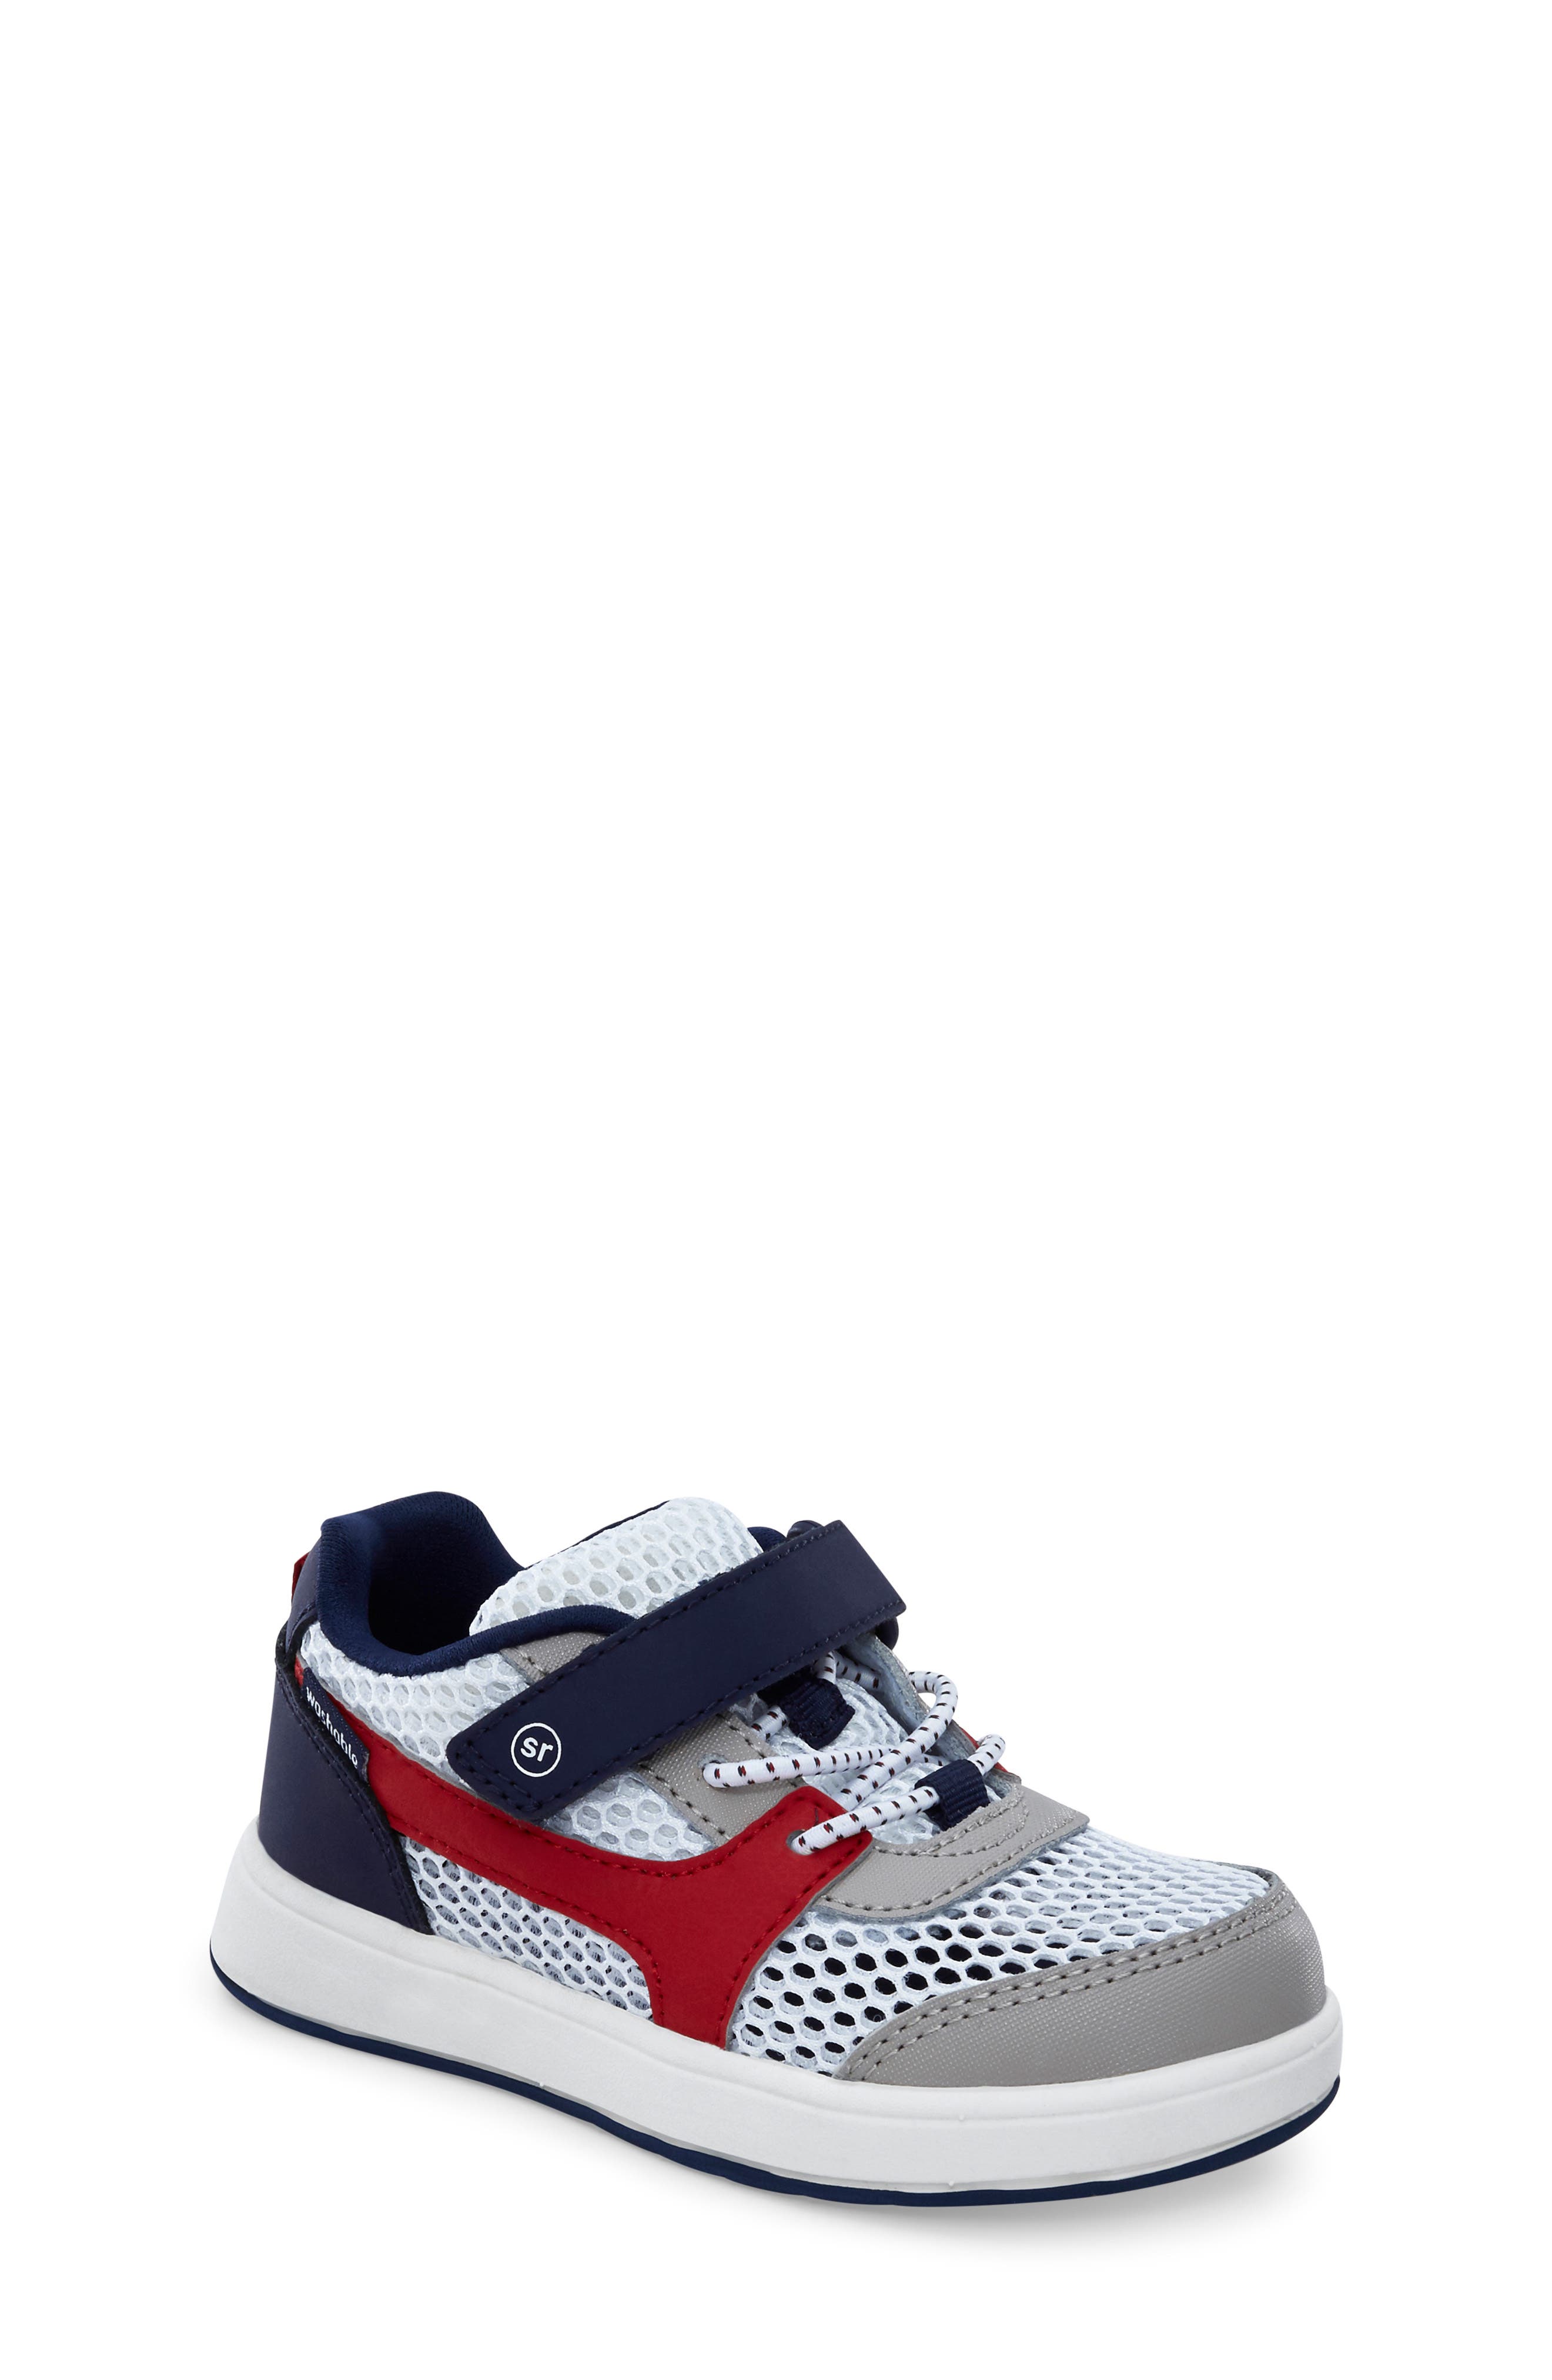 Stride Rite Calyx H&L Athletic Sneaker White/Navy/Silver Boys Shoes 